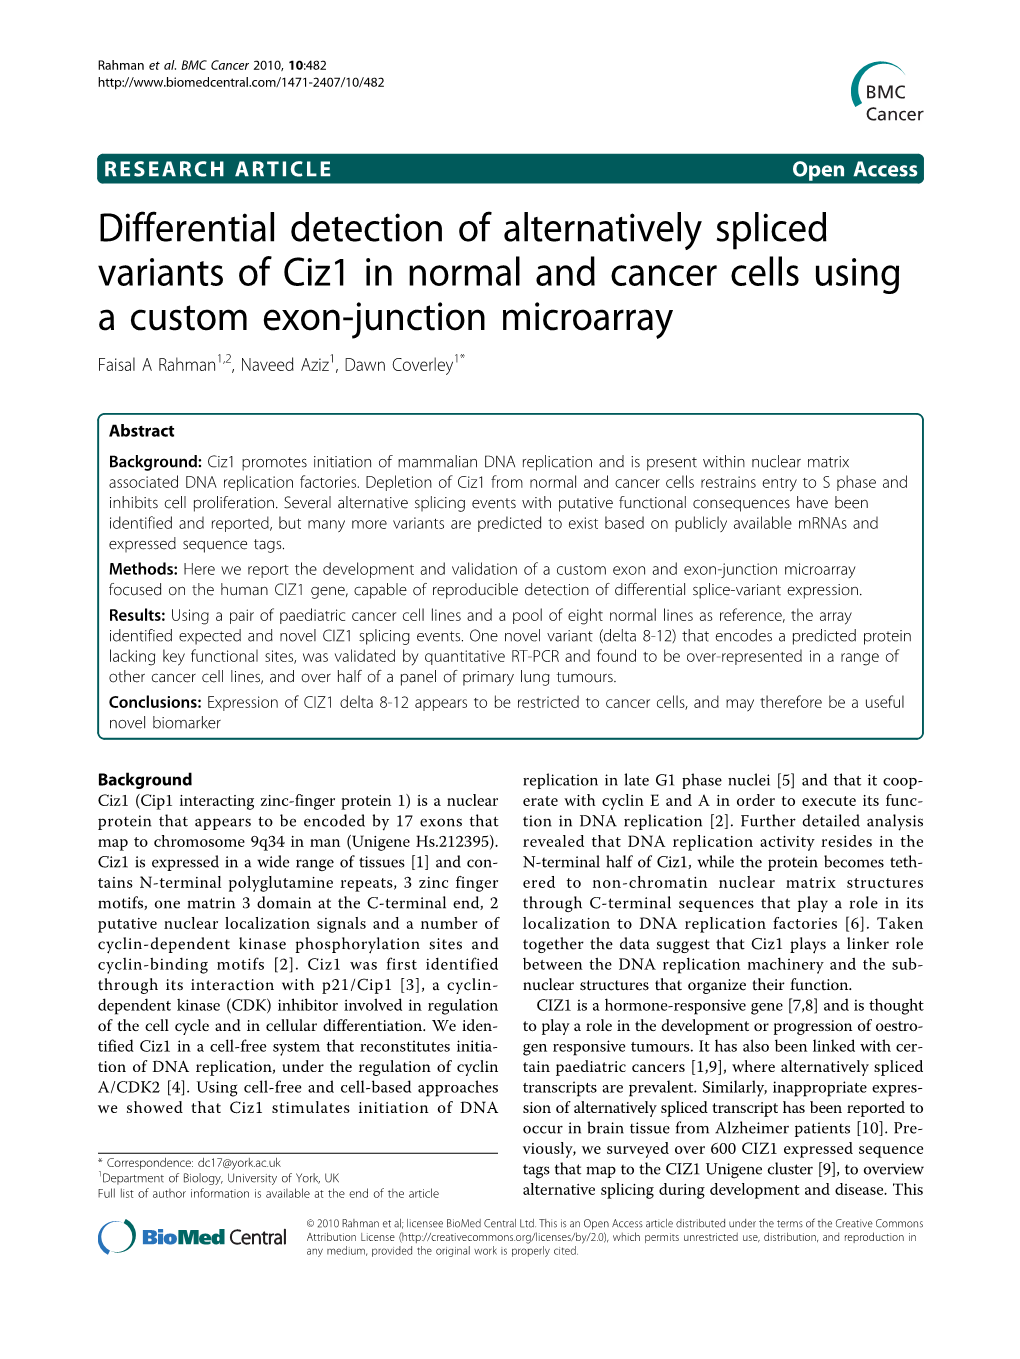 Differential Detection of Alternatively Spliced Variants of Ciz1 in Normal